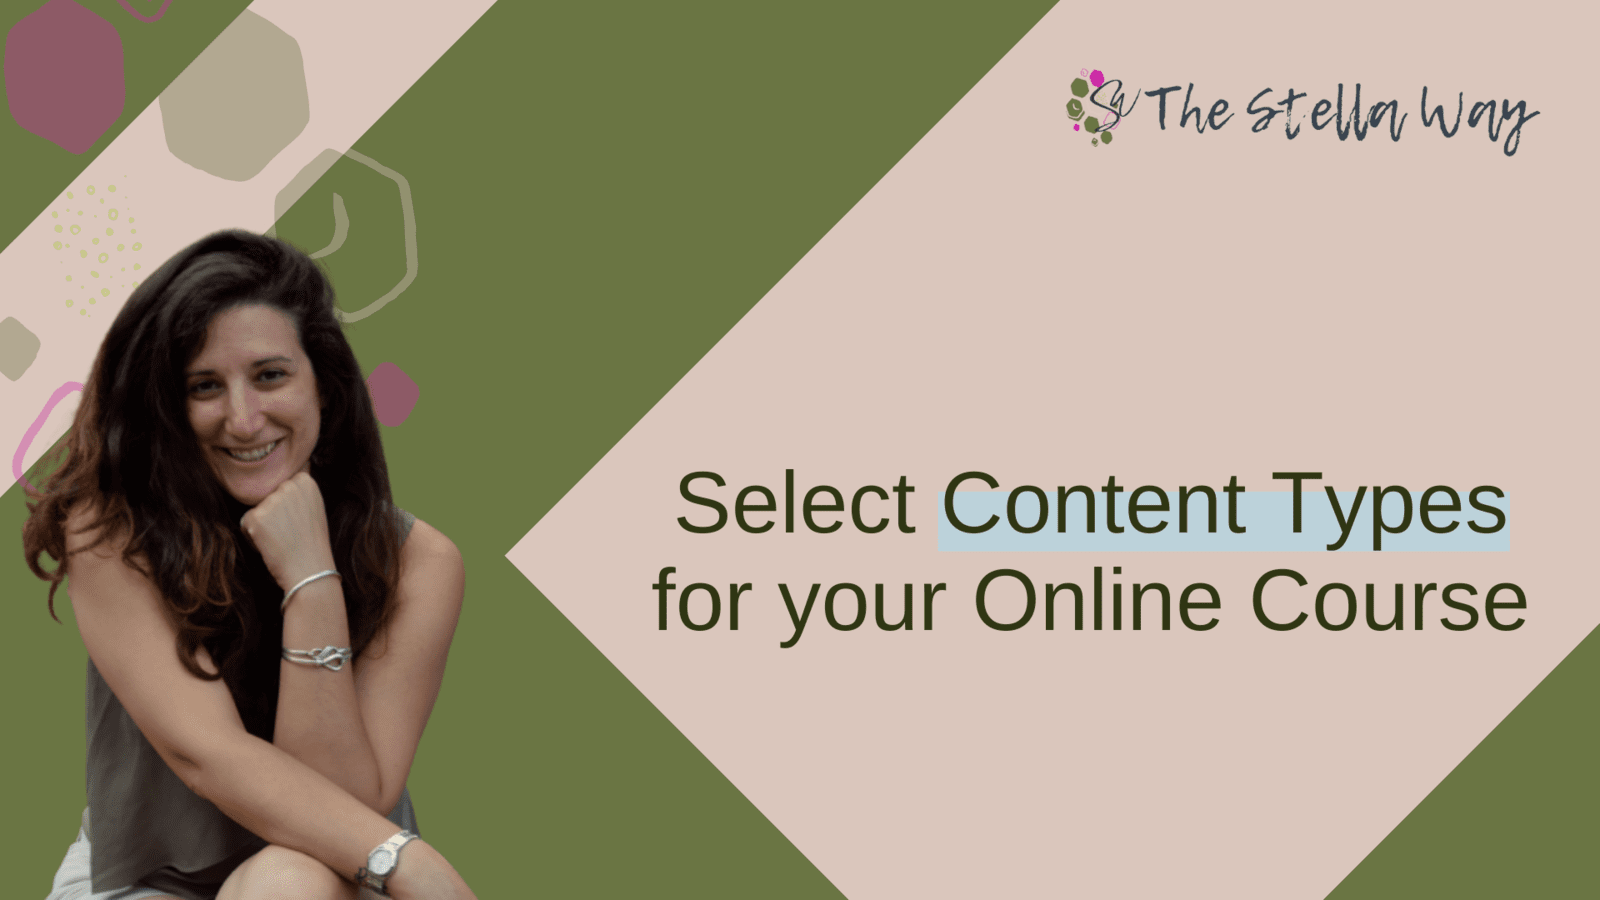 How to actually select the right content types for online course